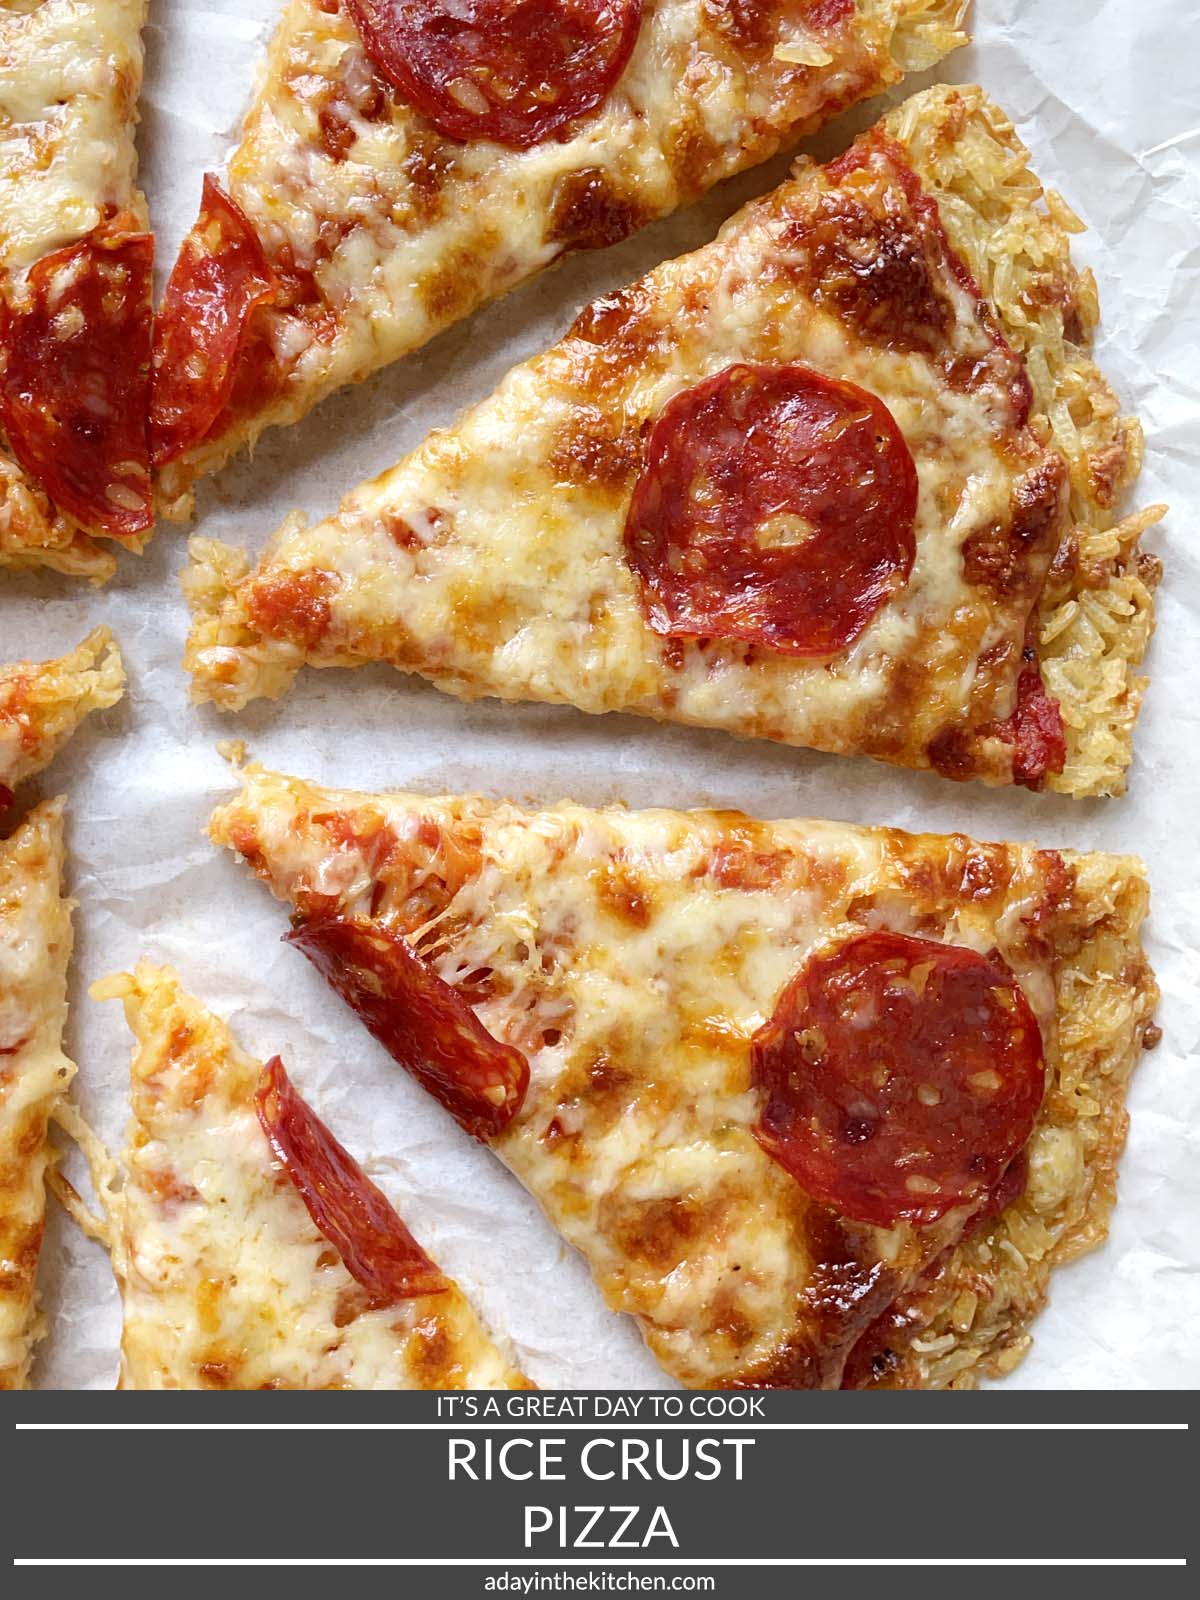 It's a great day to cook rice crust pizza. Slices of pizza on a white paper.